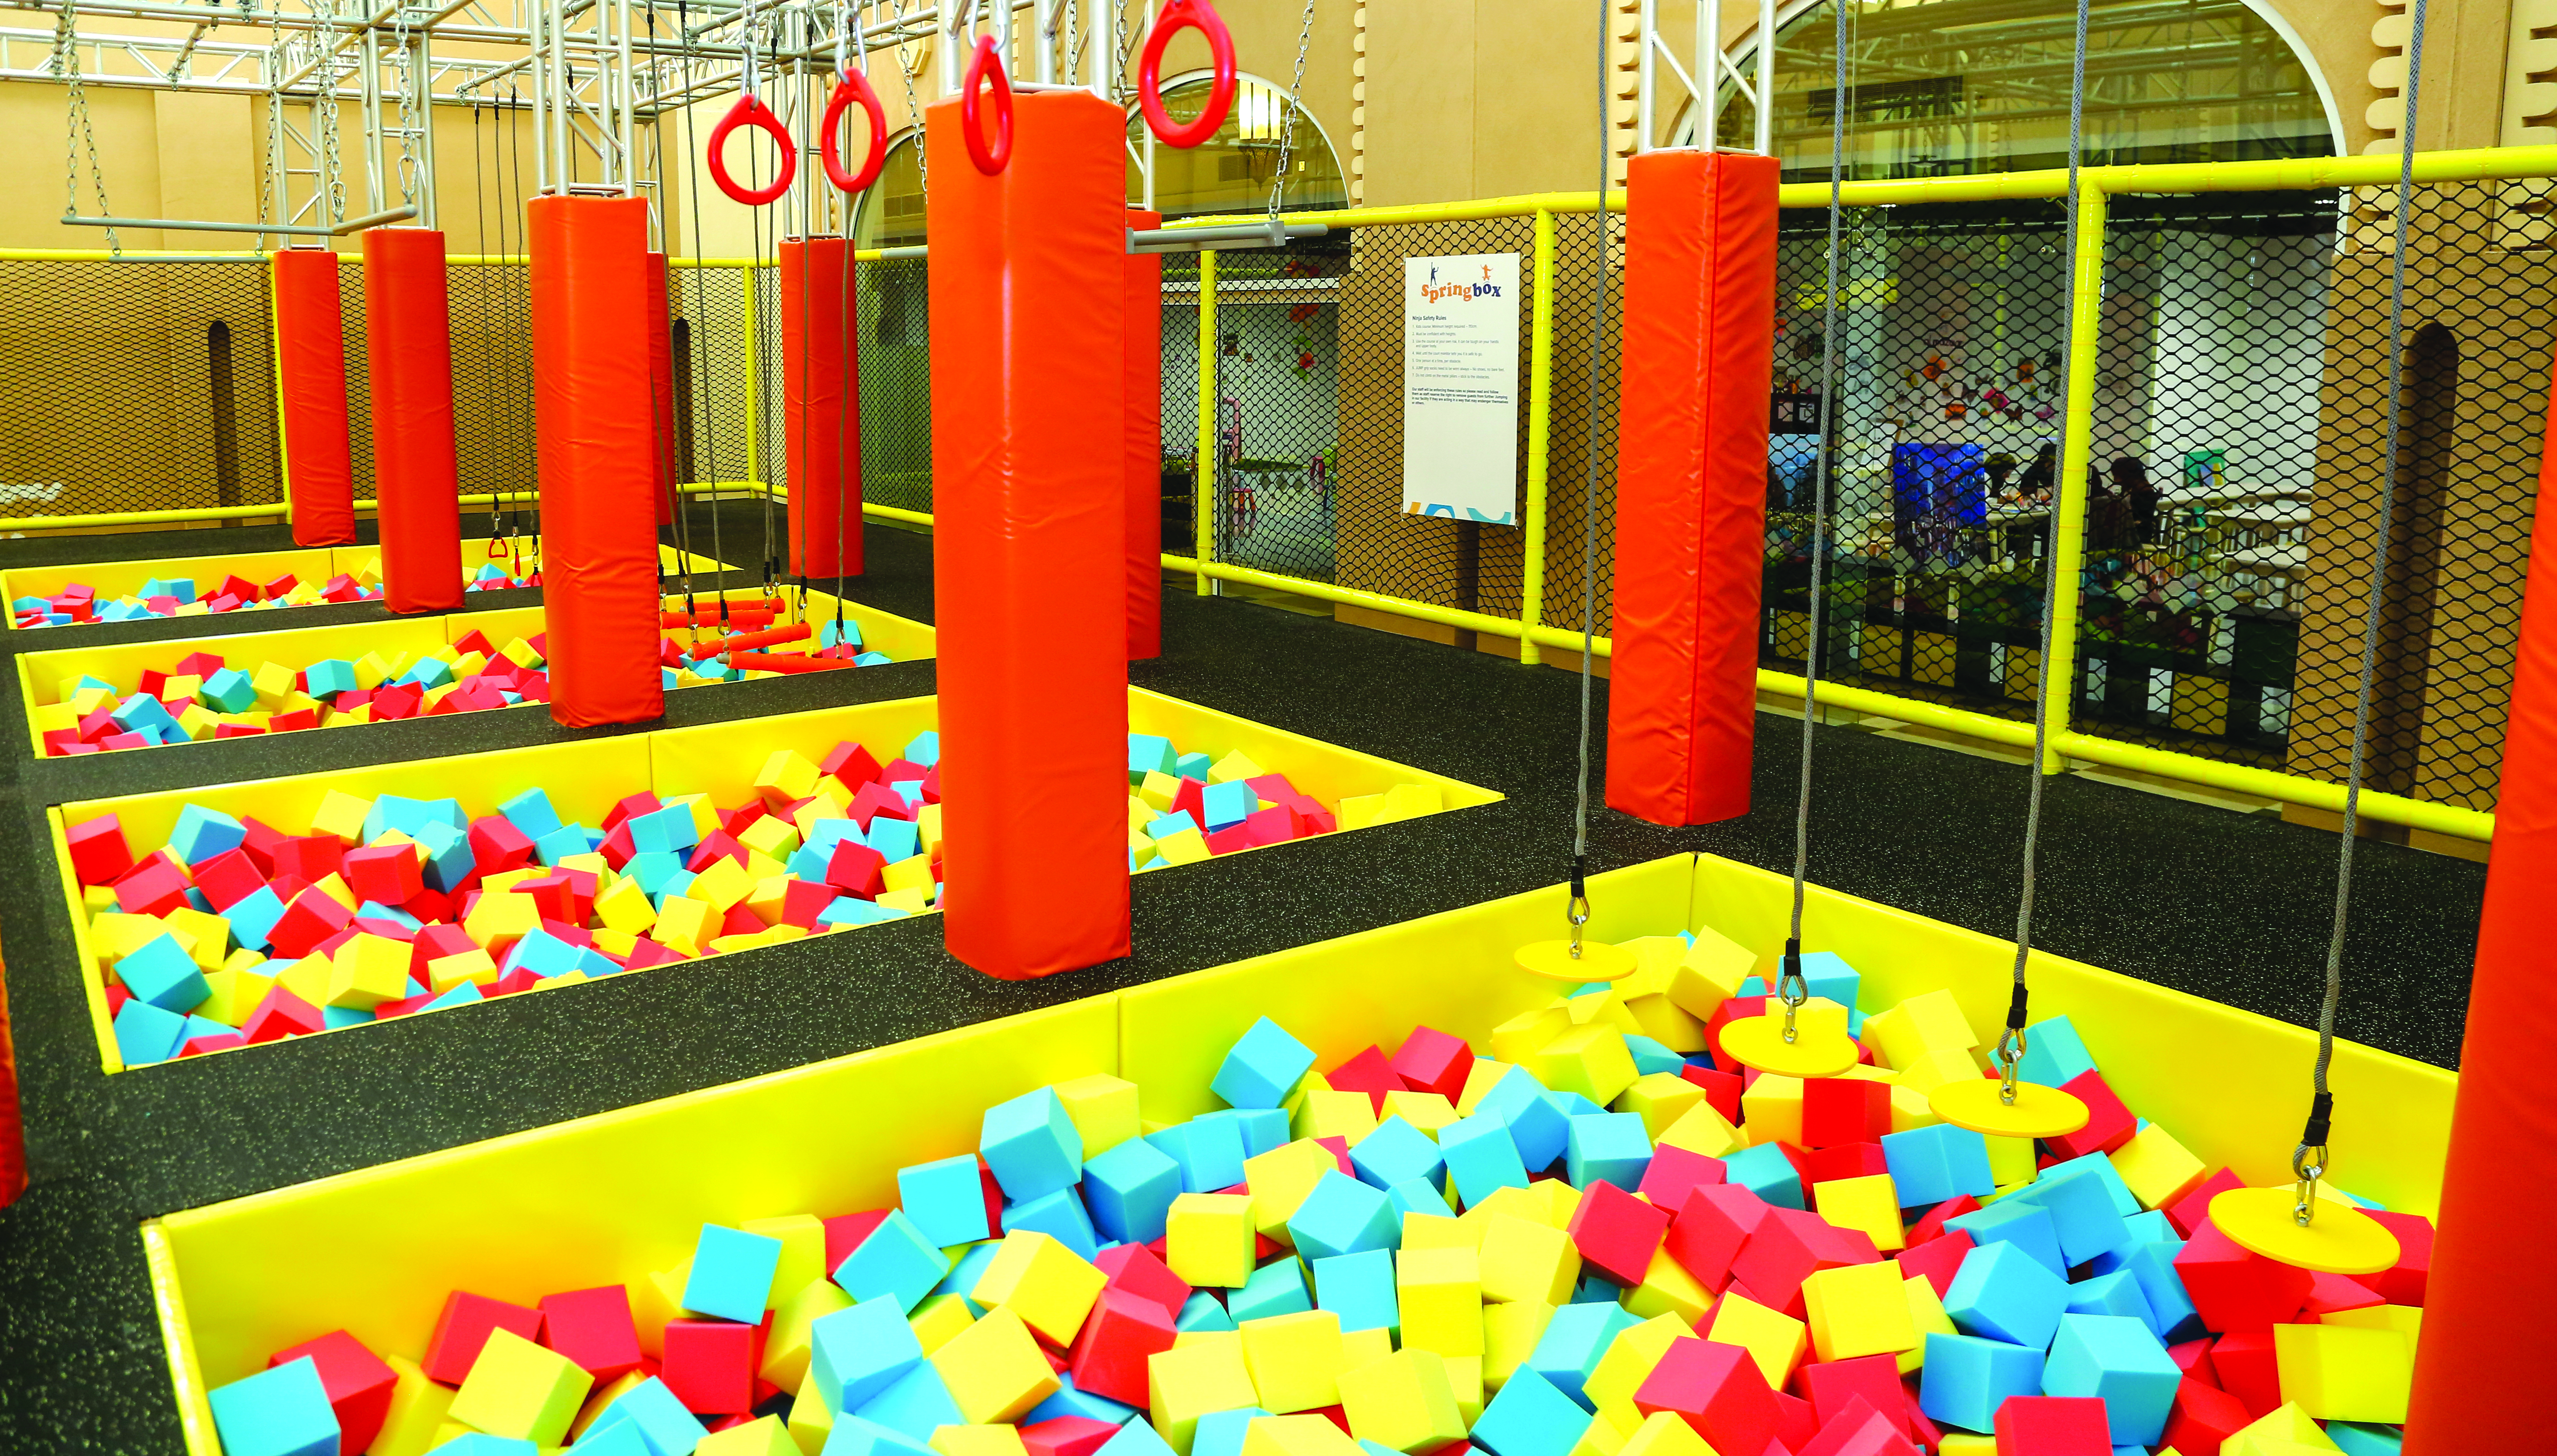 Take your kids to Al Mazaar Edutainment Centre in Muscat